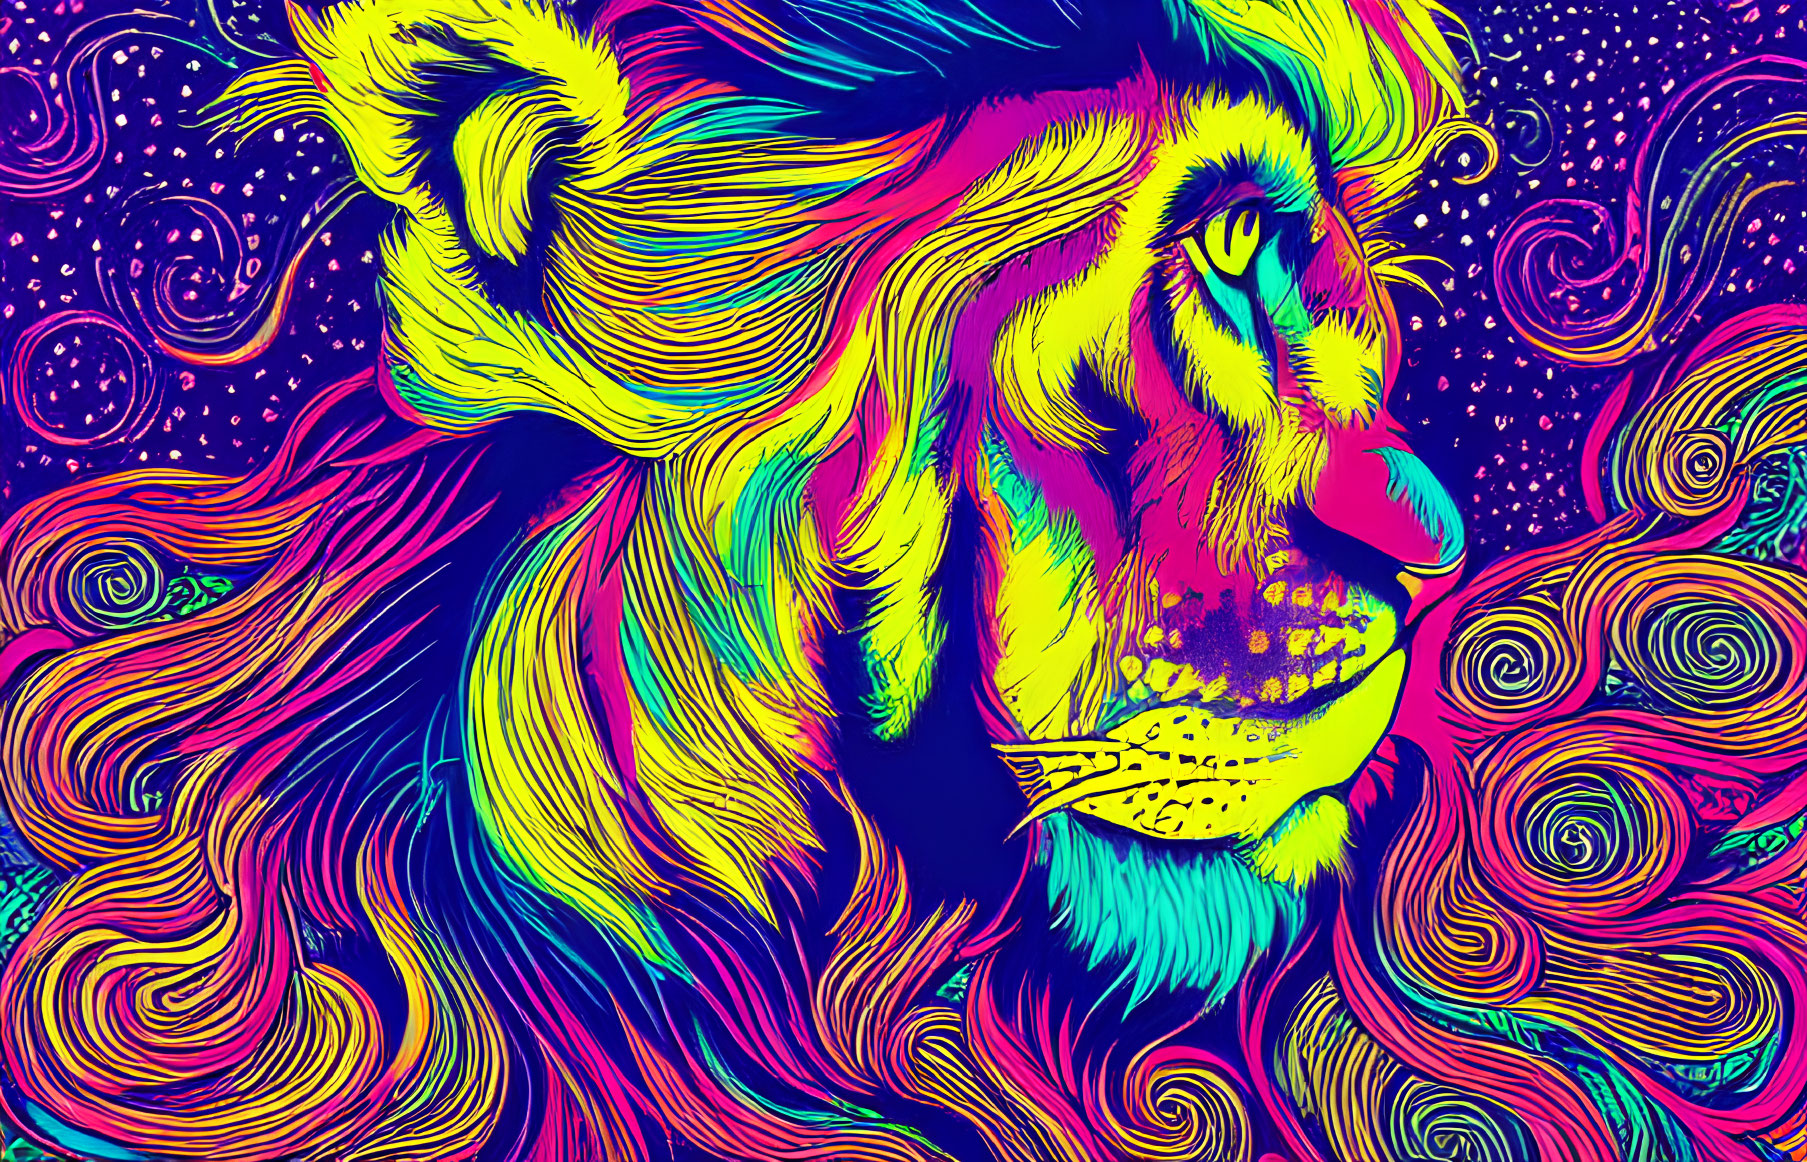 Colorful Psychedelic Lion Illustration with Swirling Patterns